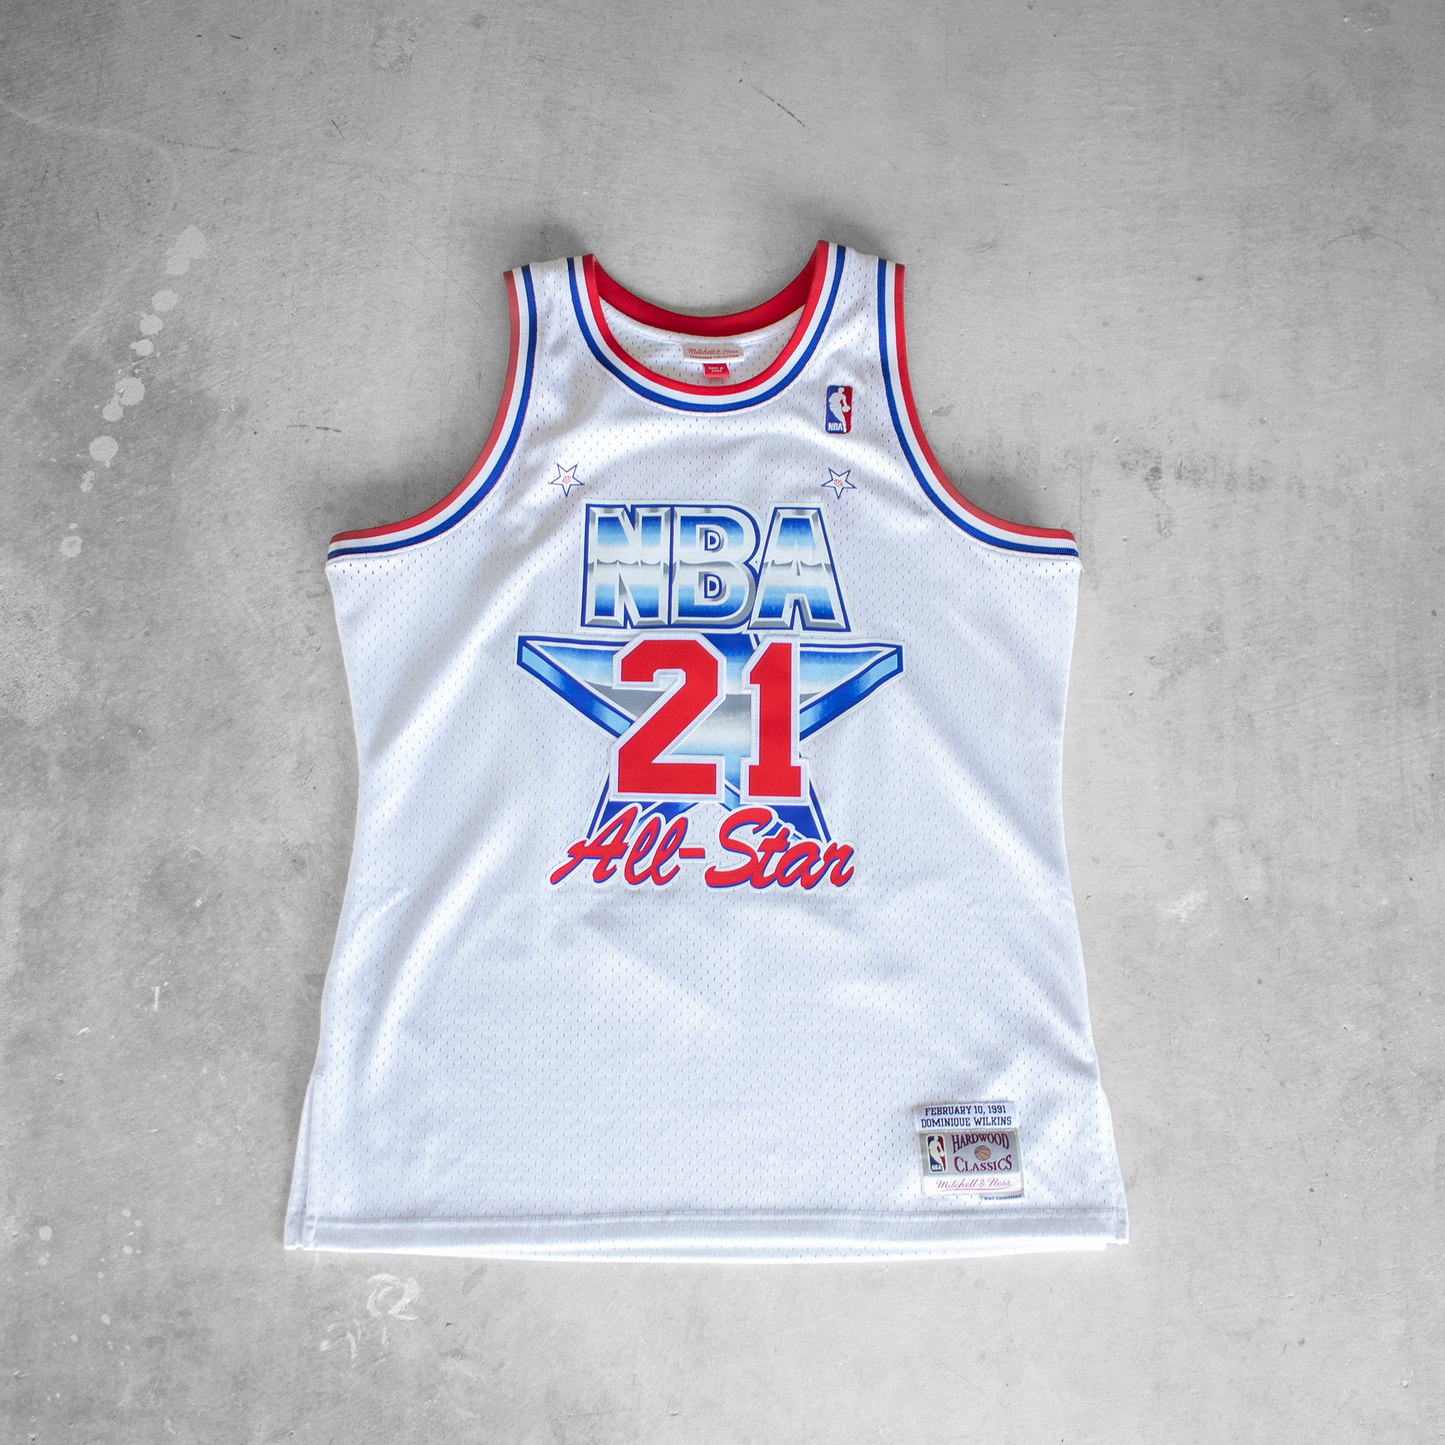 Mitchell & Ness NBA All Stars Dominique Wilkins #21 Basketball Jersey (L)